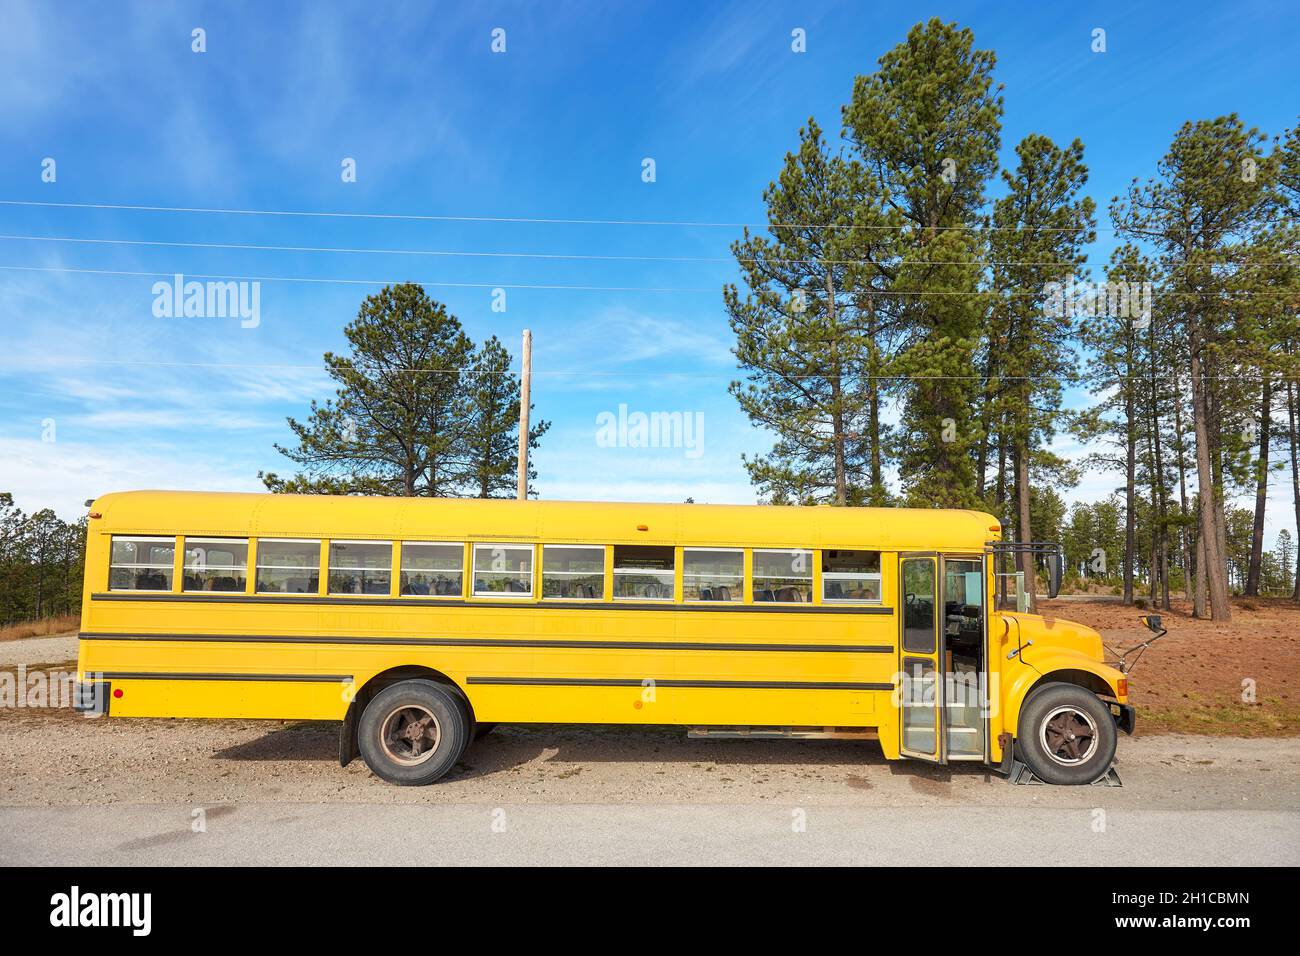 School bus parked at the side of a country road, South Dakota, USA. Stock Photo